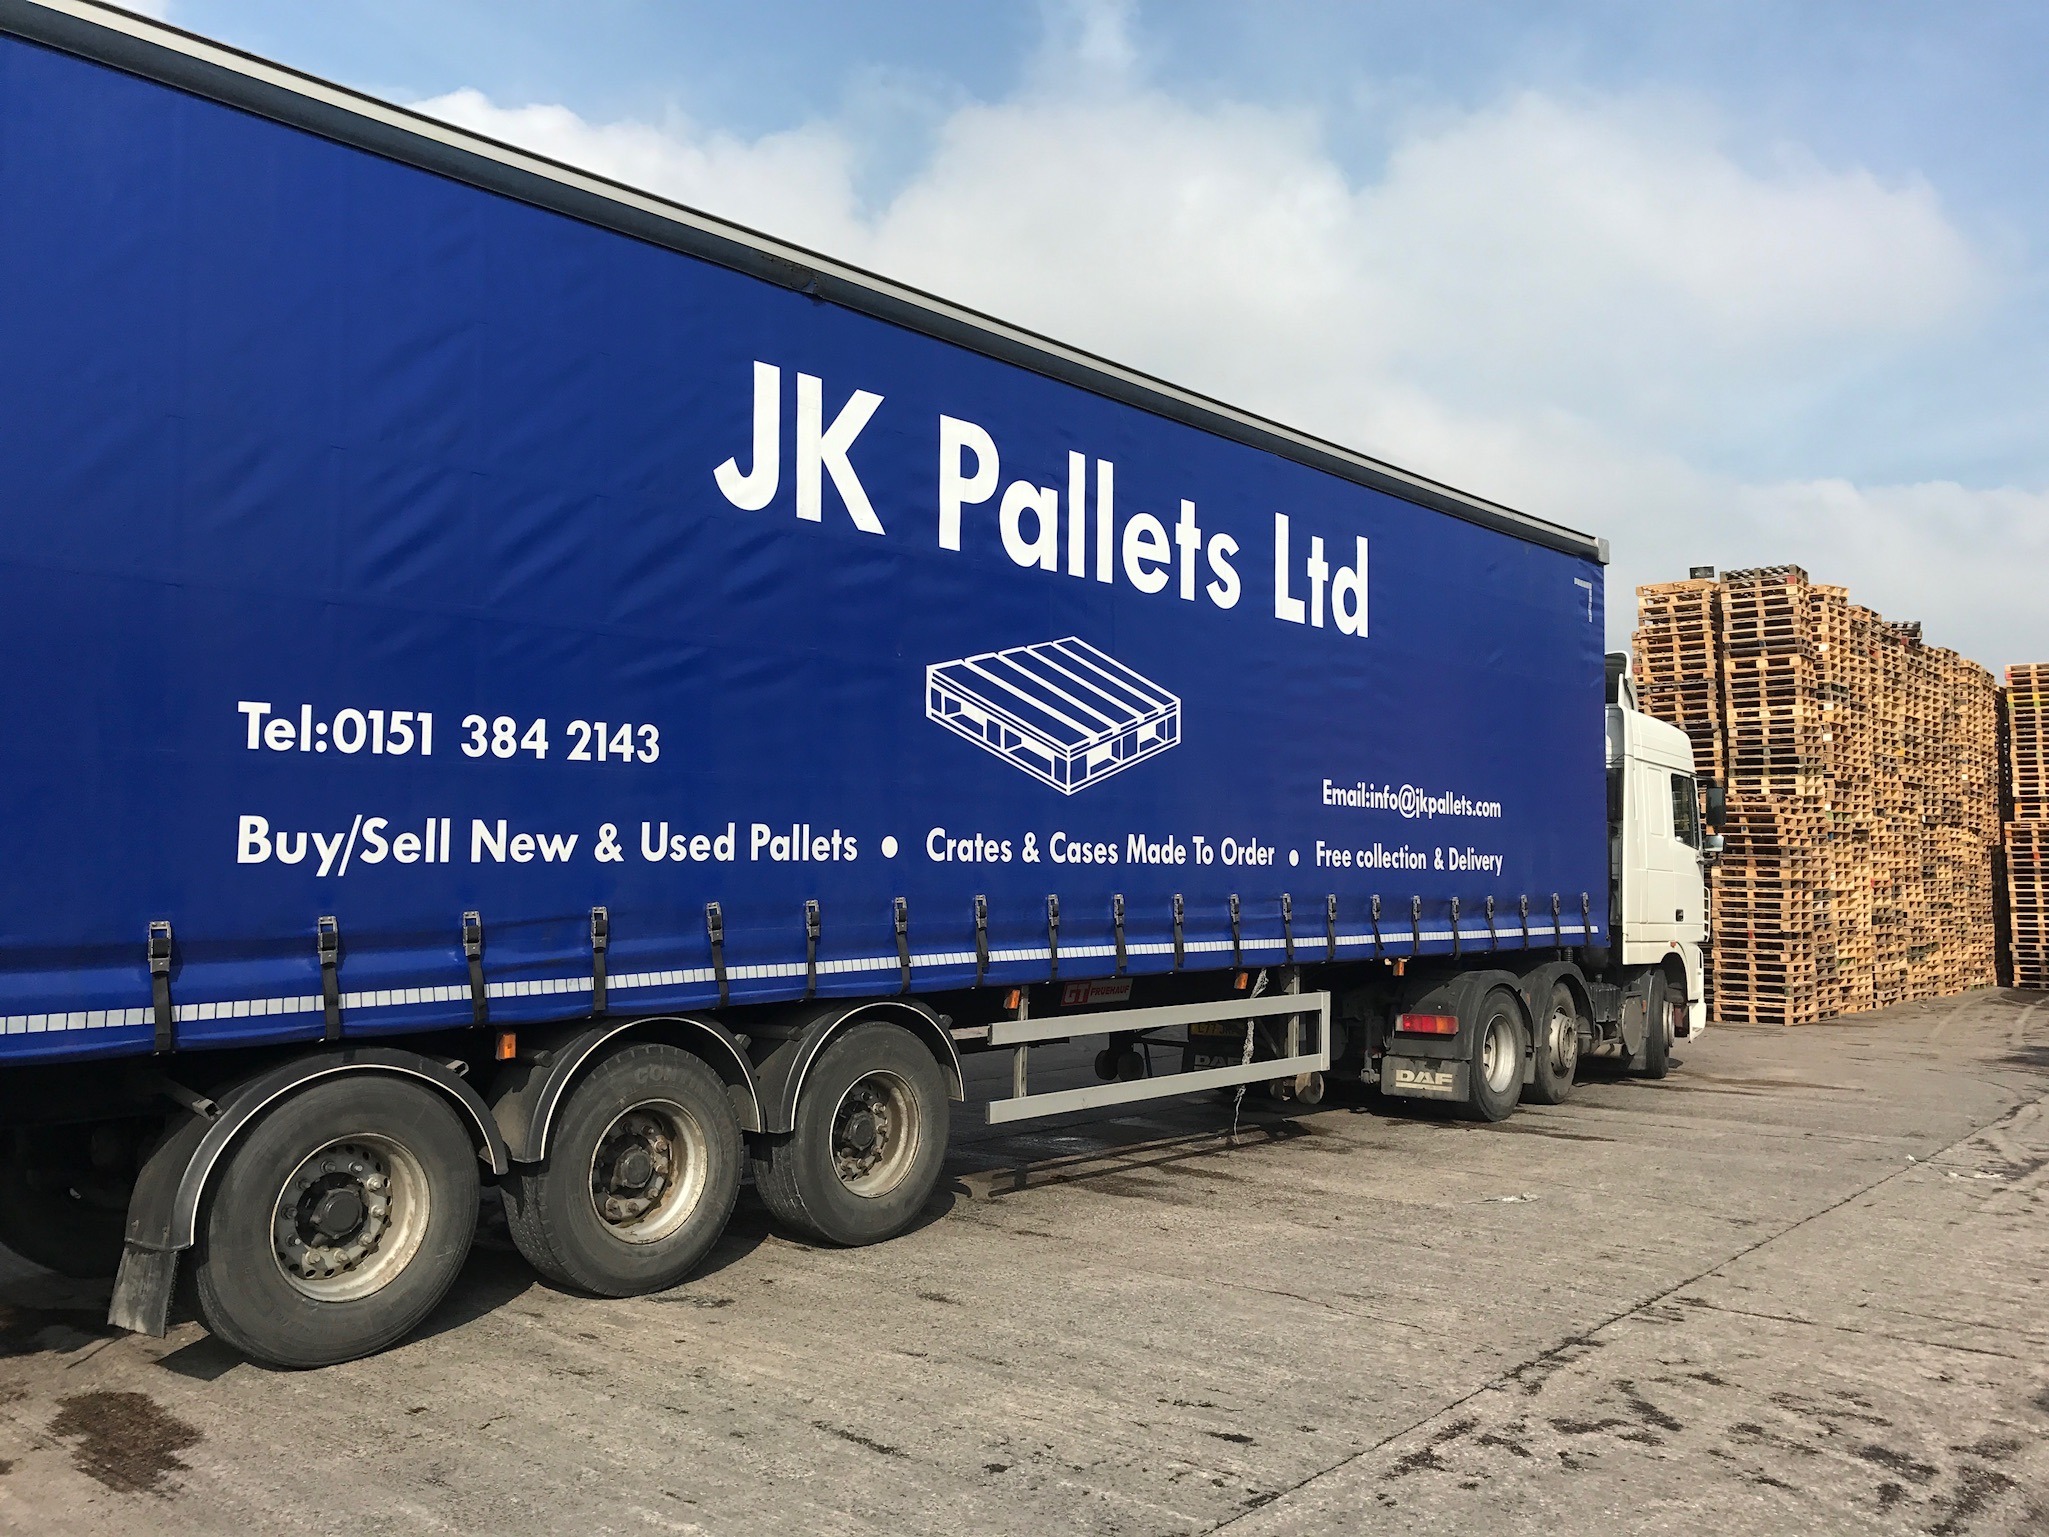 Why do exported pallets need ISPM15 treatment?